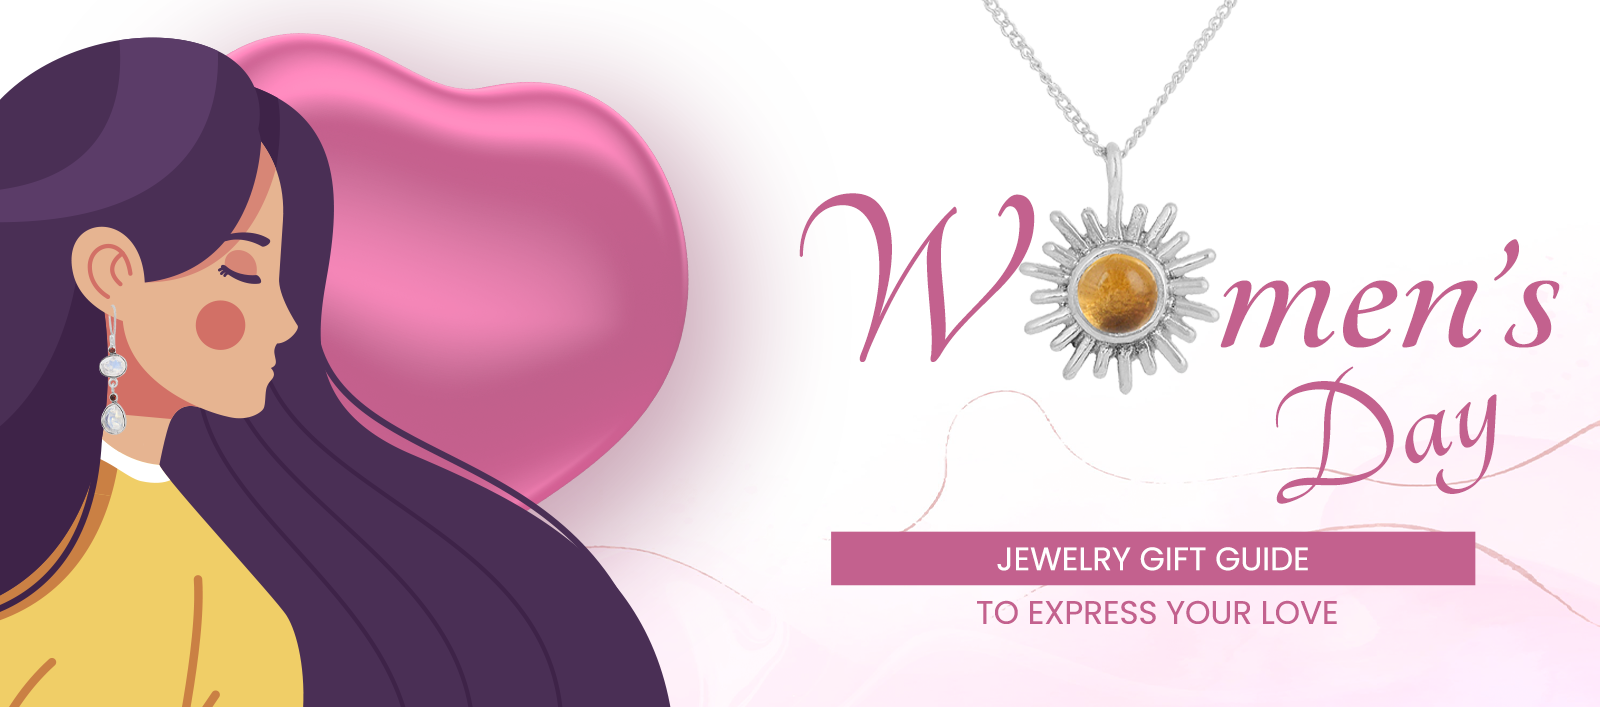 Women's Day Jewelry Gift Guide to Express Your Love